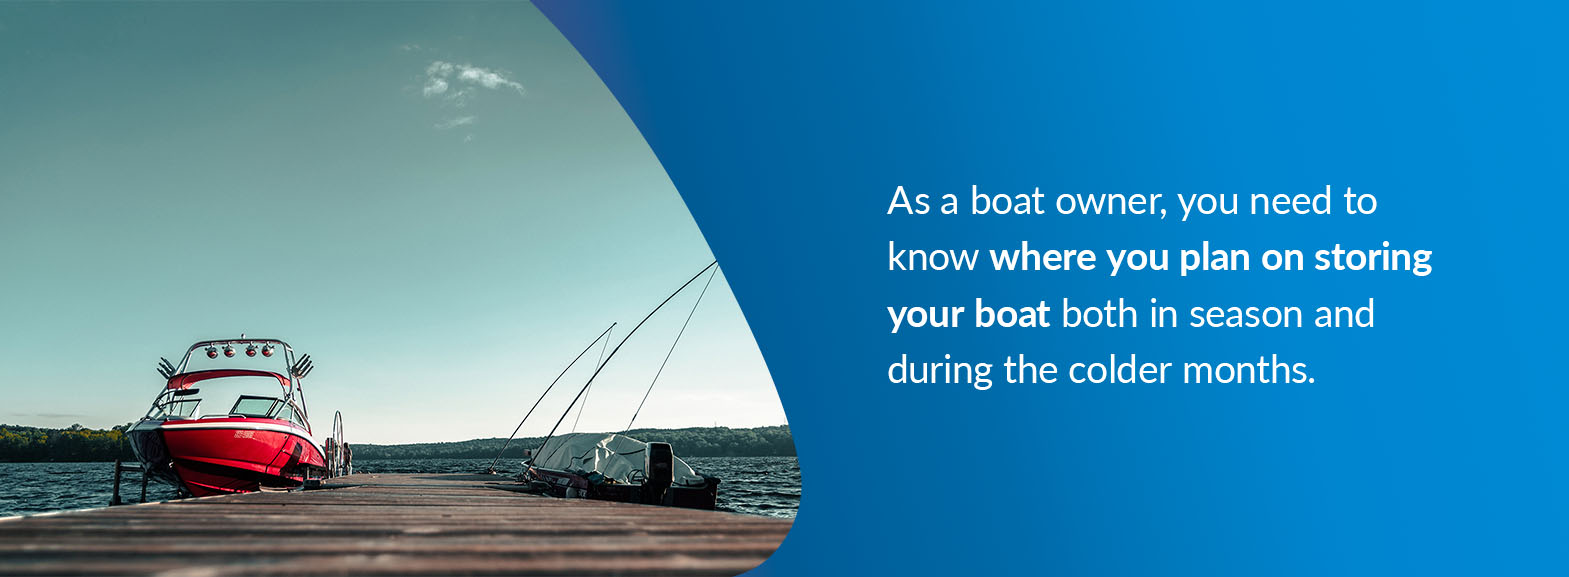 As a boat owner, you need to know where you plan on storing your boat both in season and during the colder months. 